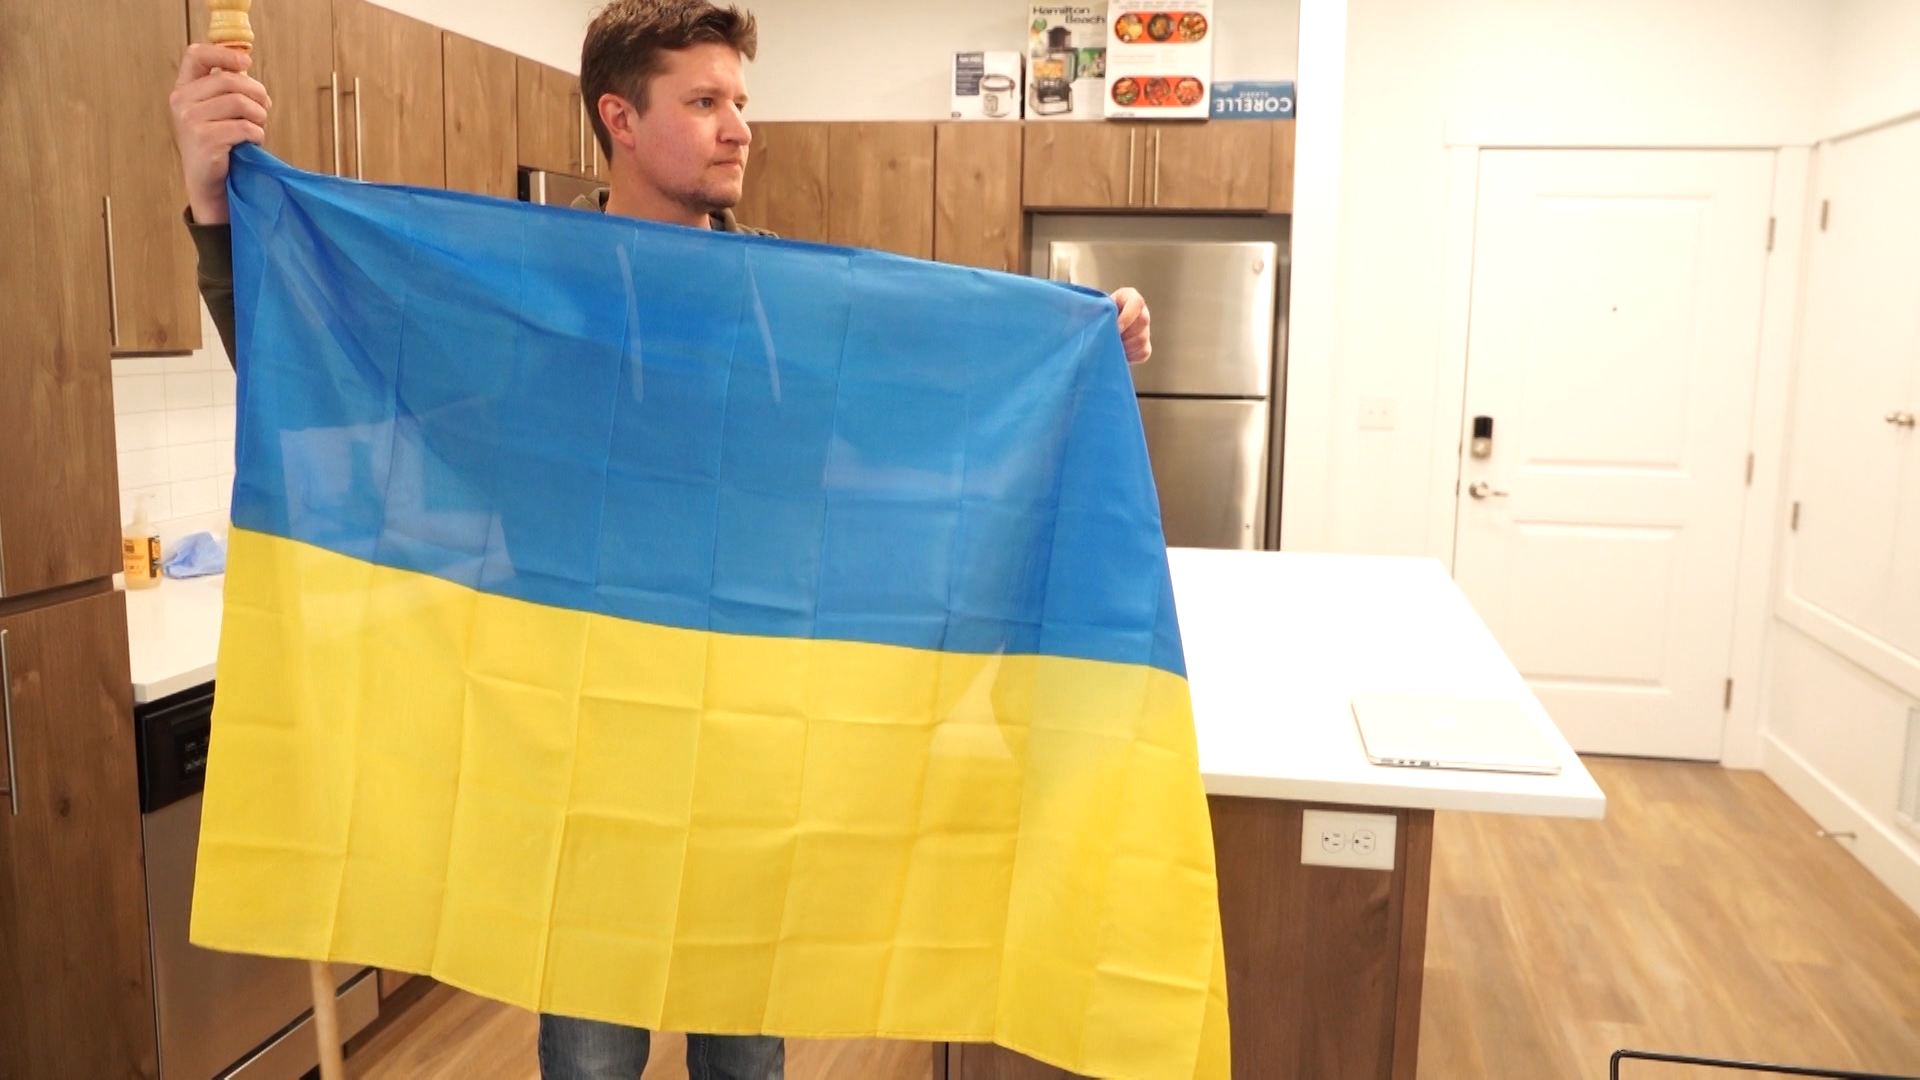 Owen Barrott wants to display the Ukrainian flag on his apartment balcony in a show of support for ...